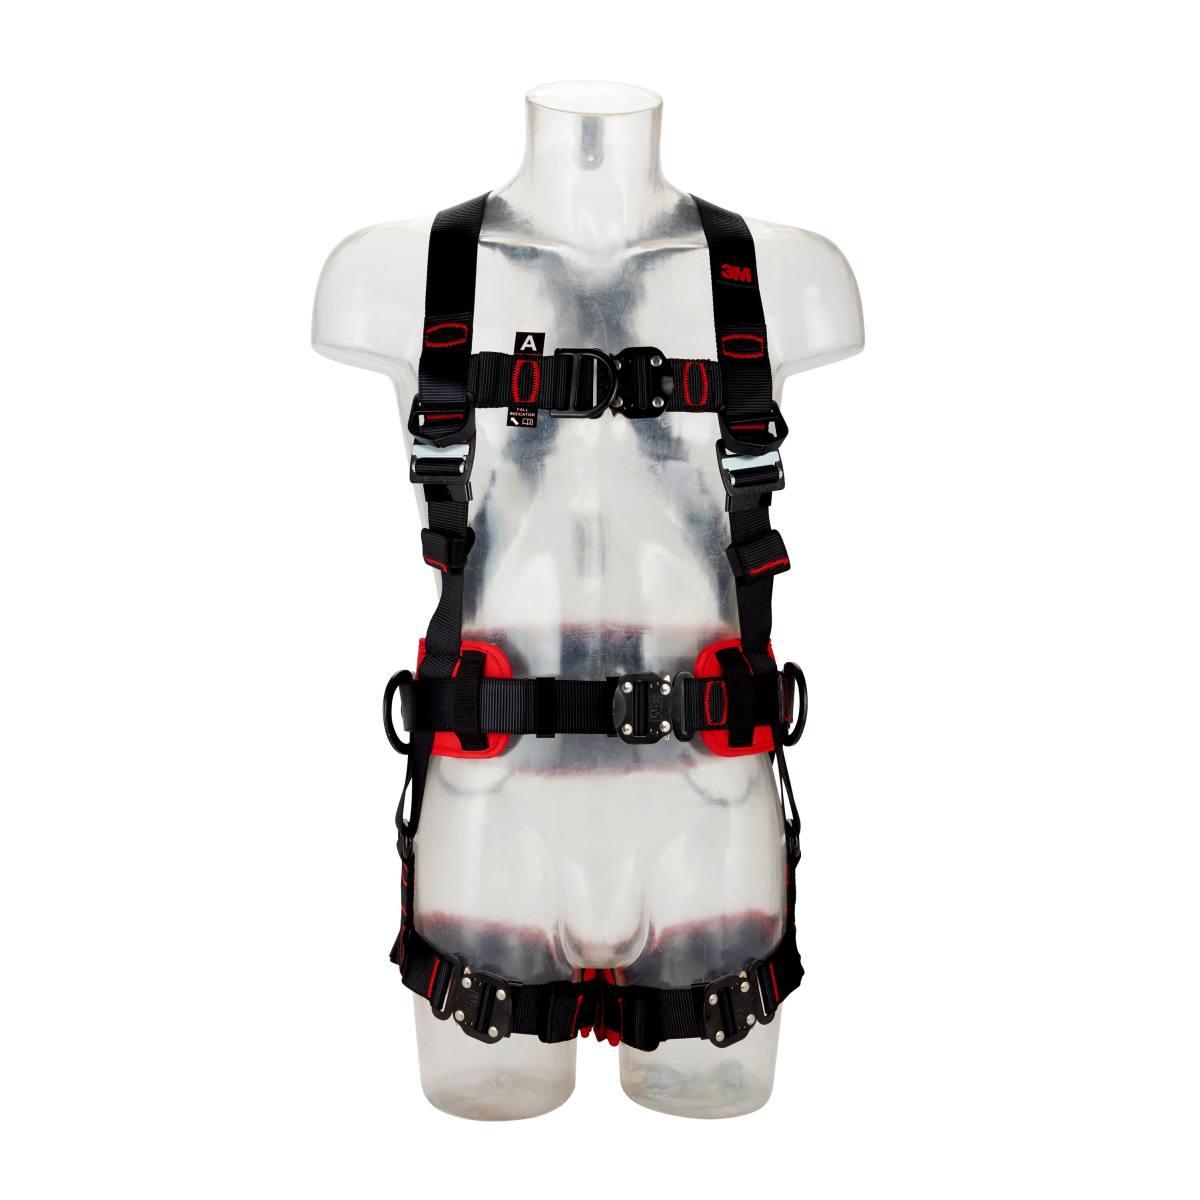 3M PROTECTA Full body harness - chest and rear fall arrest eyelets, comfort harness with side attachment points, tool loops, automatic buckles, chest and rear fall indicators, belt end depot, label protection with labelling field... , M/L